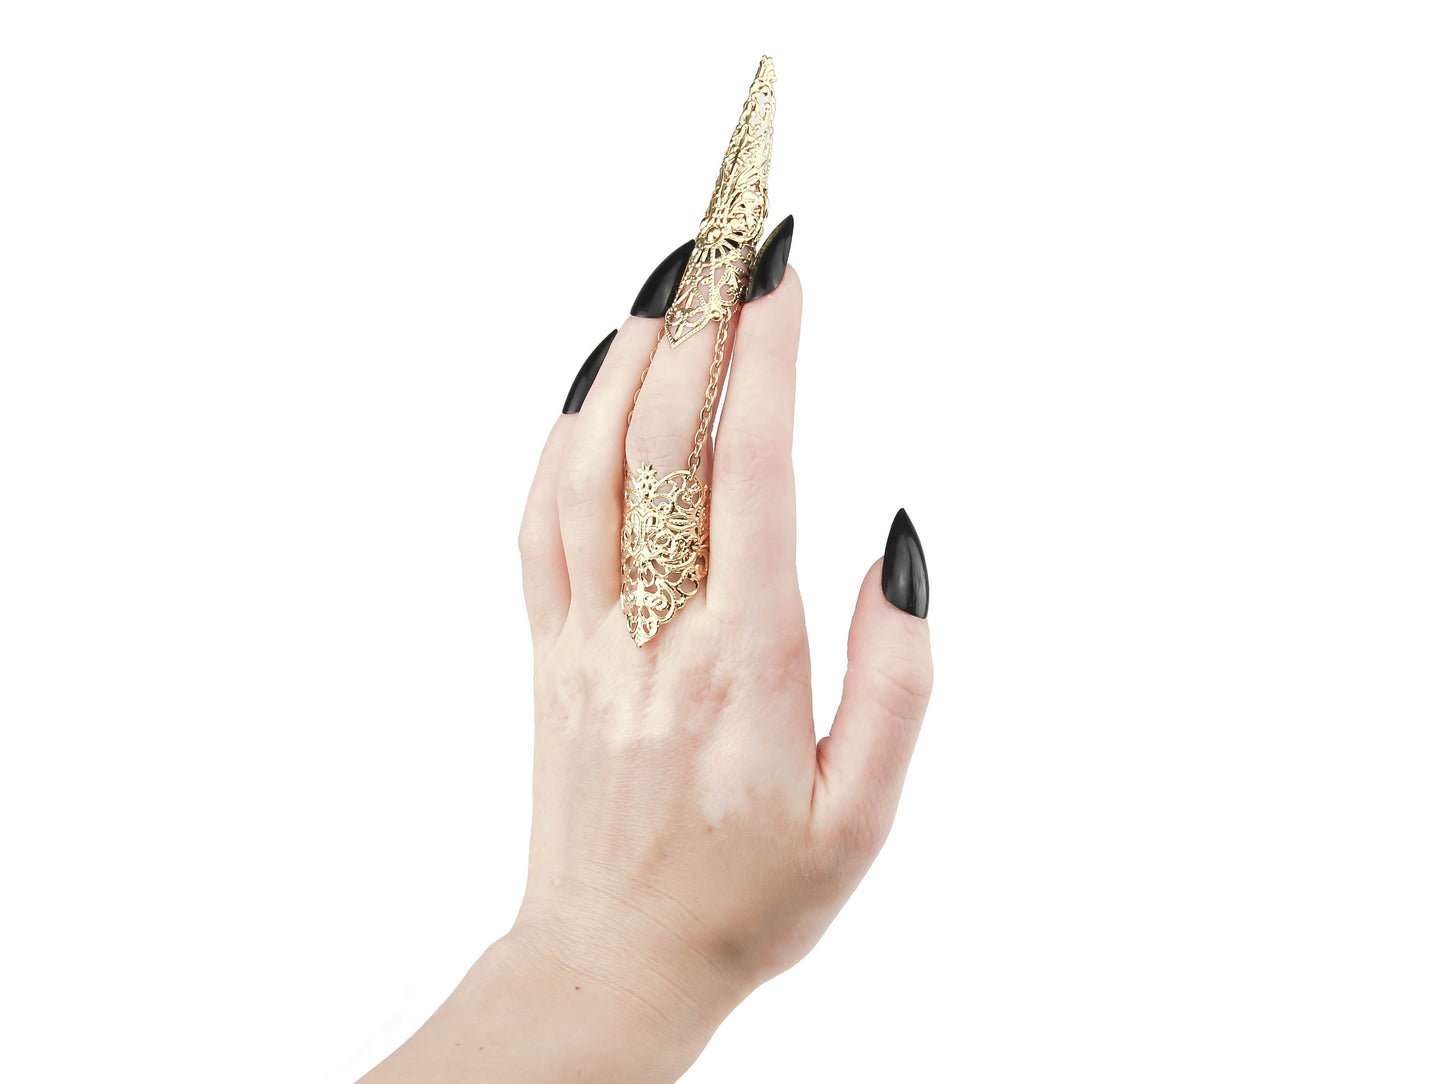 A hand is elegantly adorned with a Myril Jewels full finger gold claw ring, crafted with exquisite filigree detailing. This statement piece from the neo-goth jewelry collection is designed for lovers of dark-avantgarde and gothic-alternative styles. It's an ideal accessory for adding a dramatic flair to Halloween costumes, punk wardrobes, or drag queen ensembles, and it suits everyday wear as well as rave parties and festivals for those who embrace whimsigoth or witchcore aesthetics